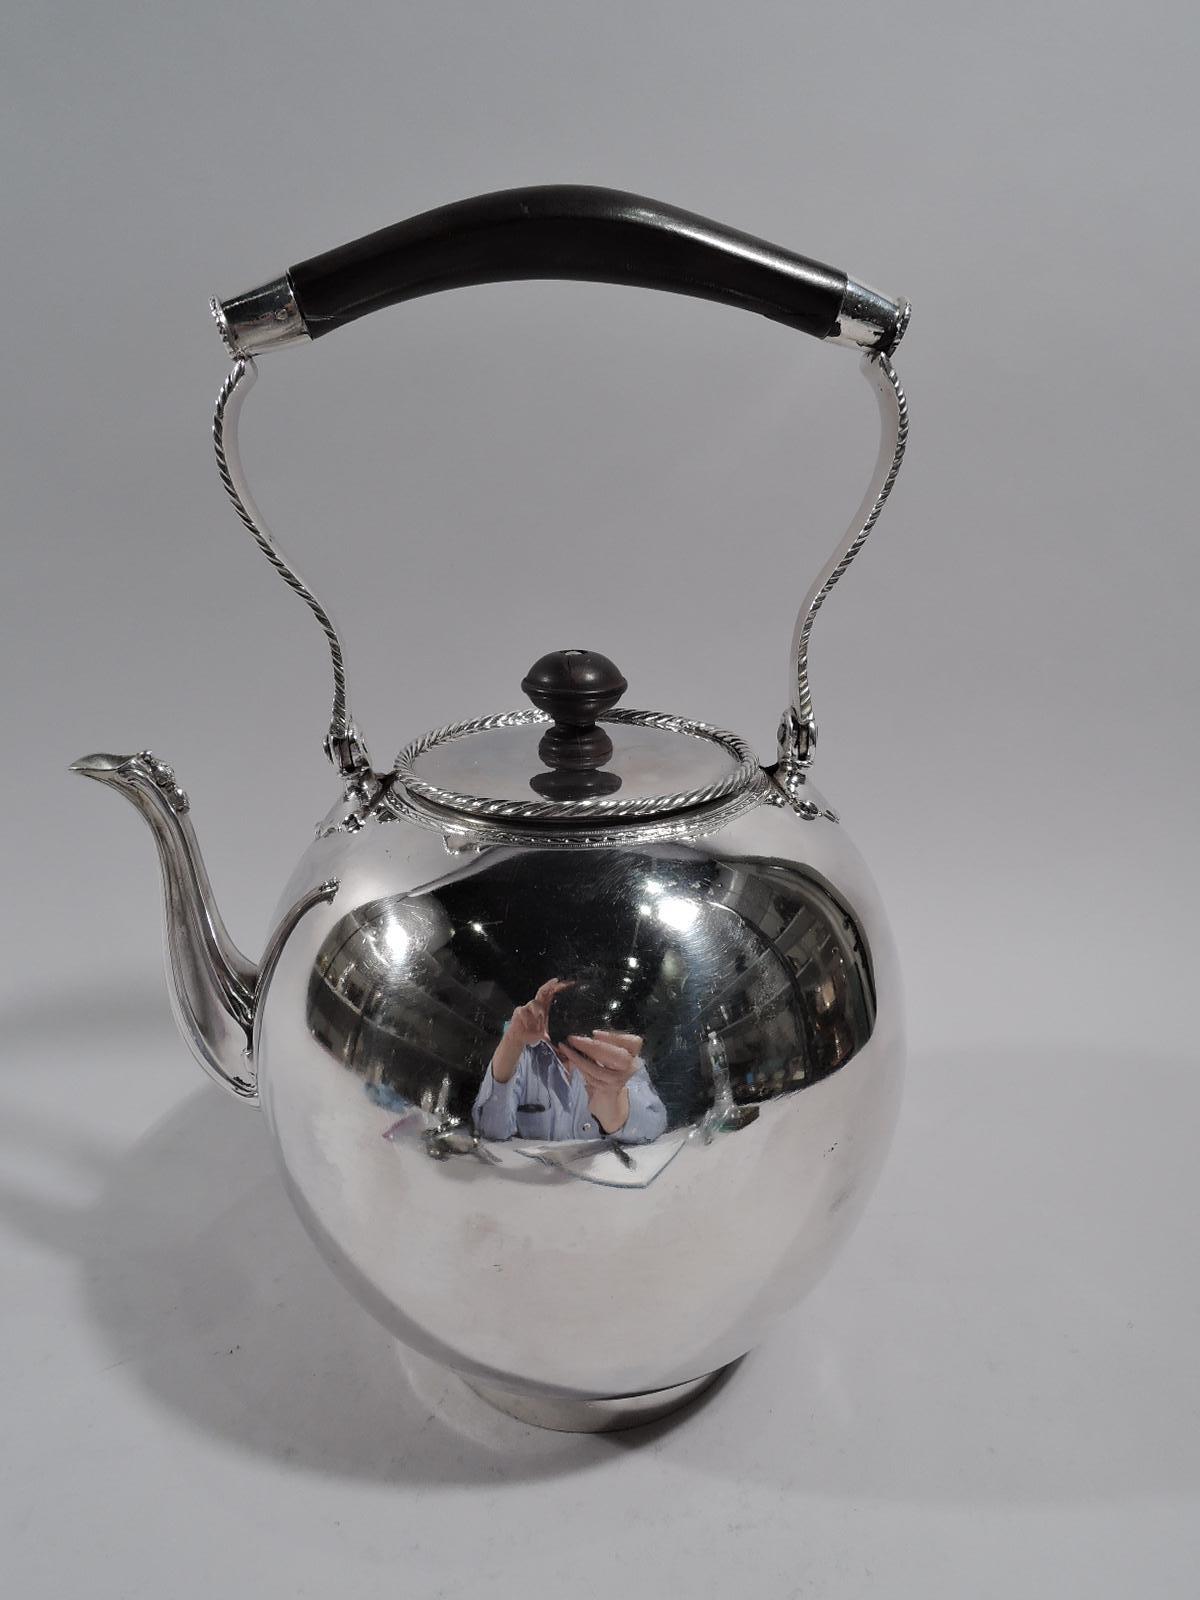 Dutch Neoclassical 875 silver teapot, 18th century. Globular body on short and inset straight foot. S-scroll spout with bead and flower cap. Cover has stained-wood finial and gadrooned rim and sits flush in mouth with raised ornamental border.